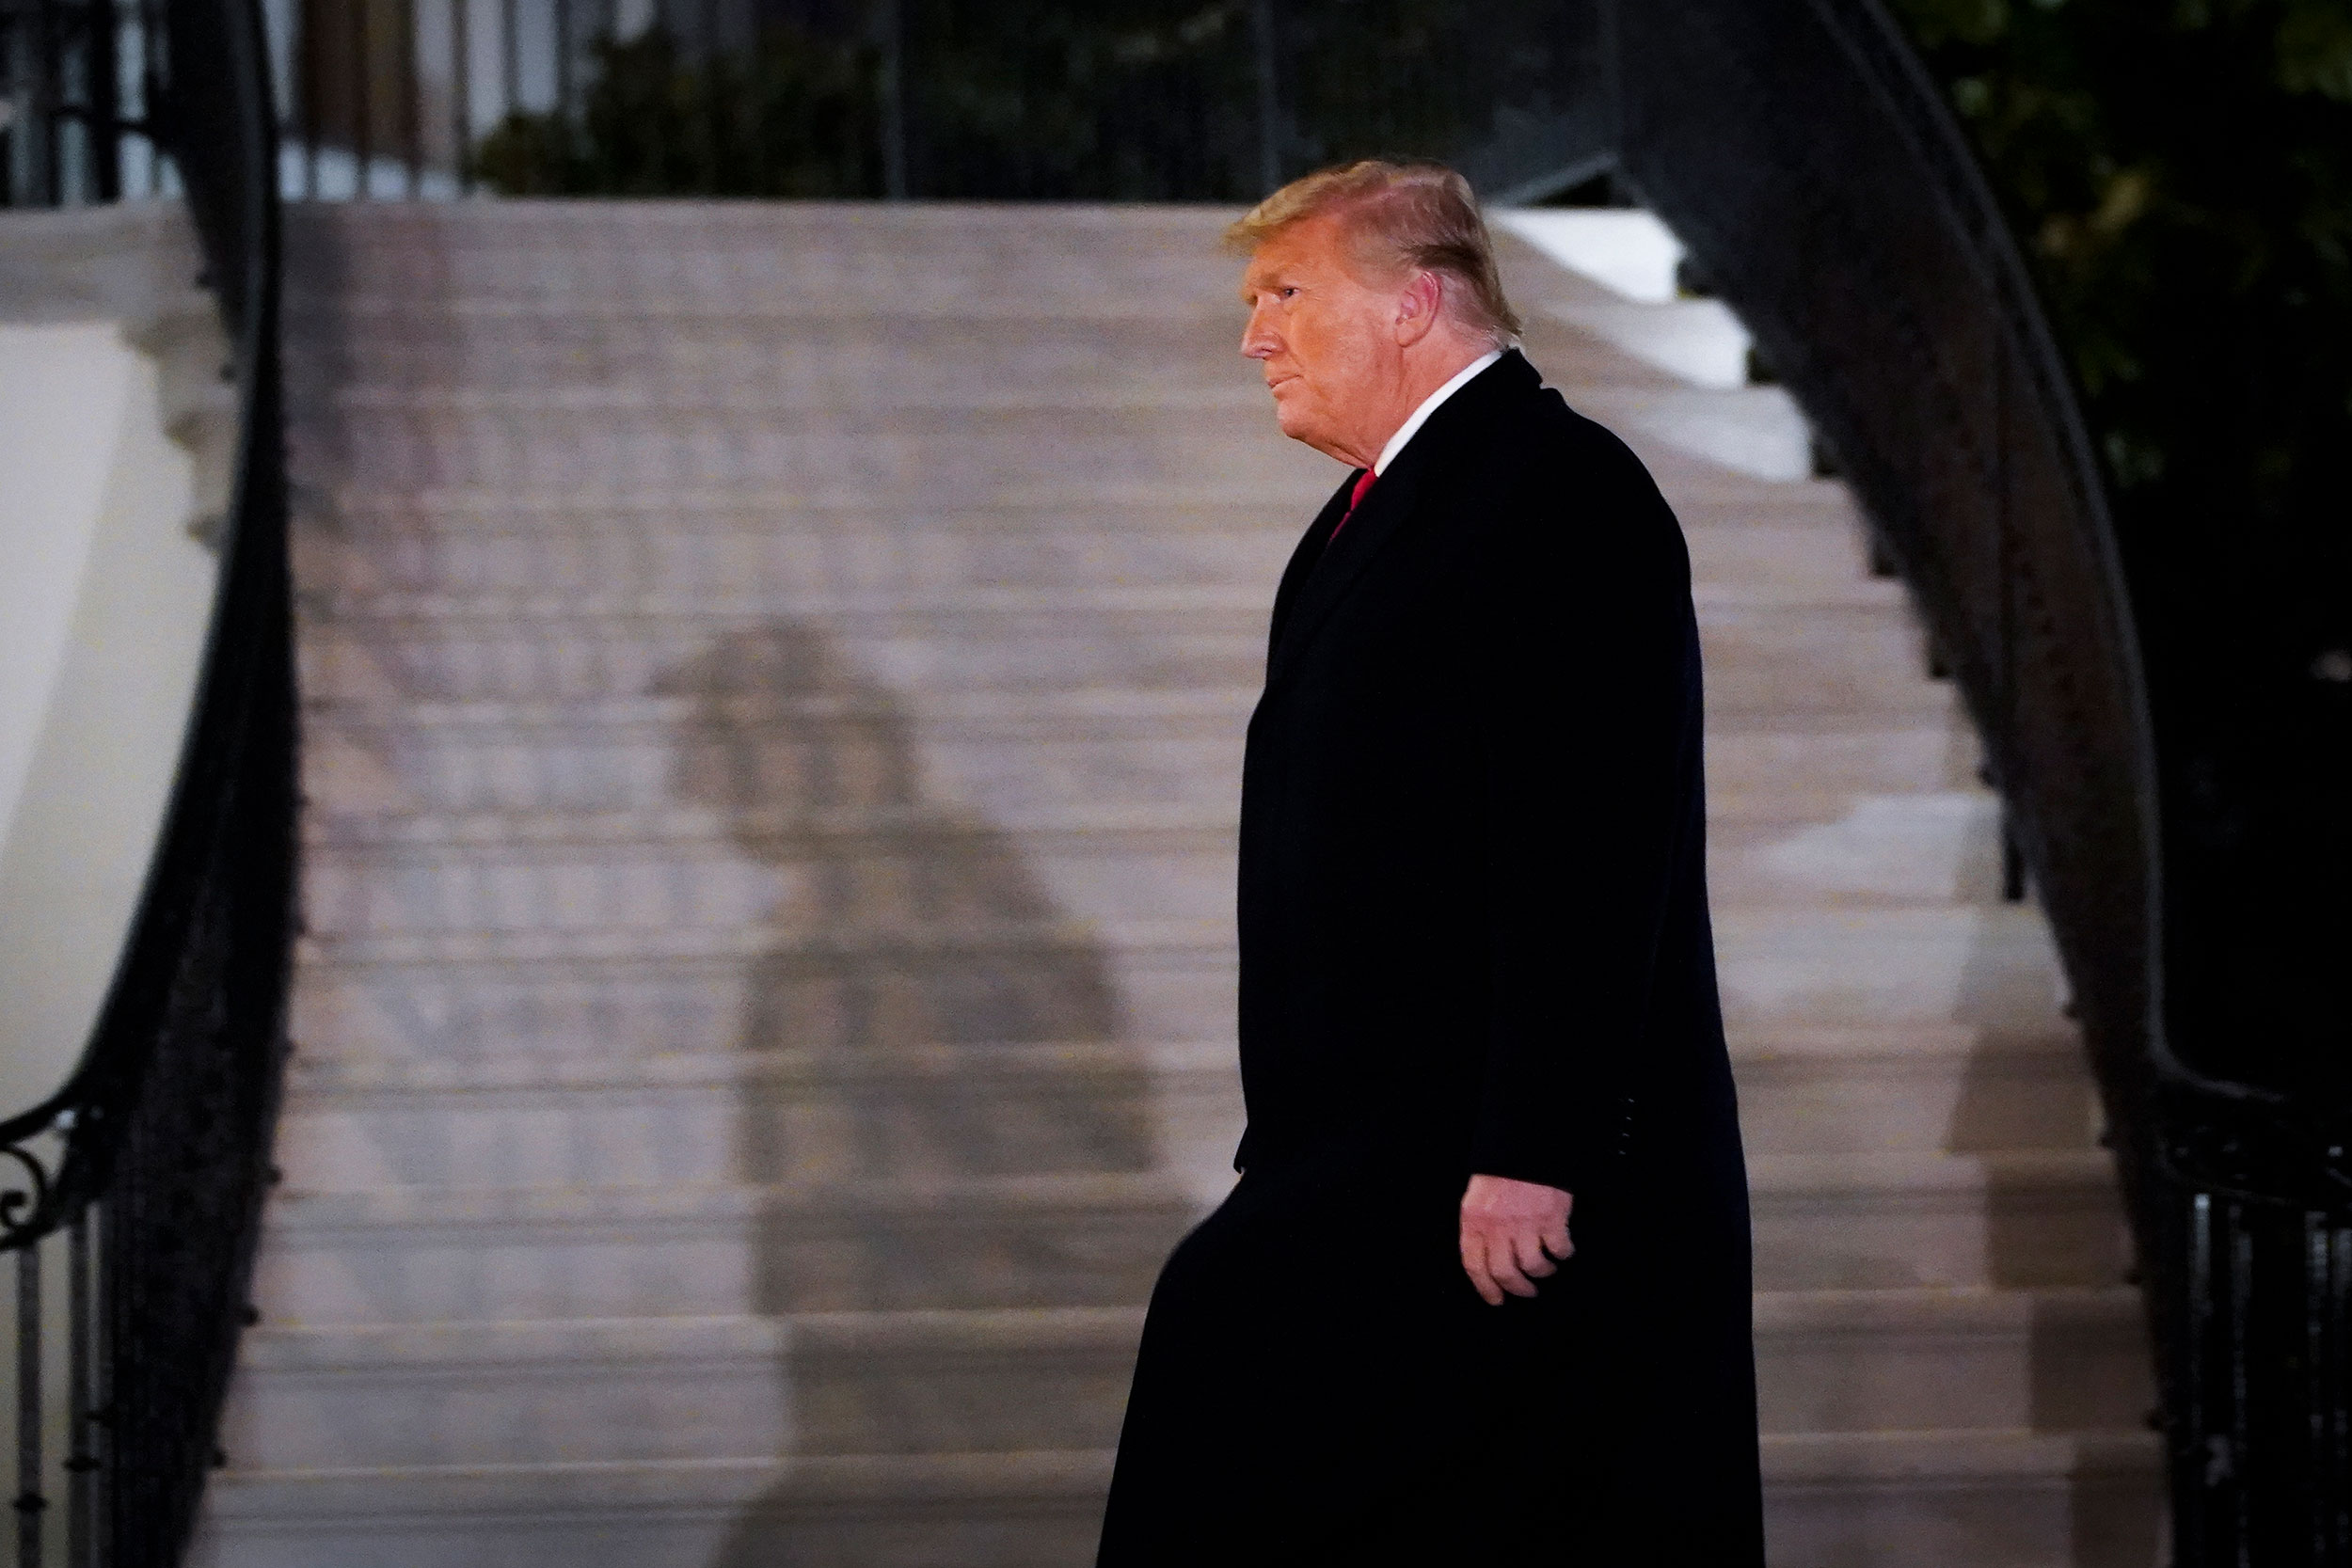 President Trump arrives at the White House on January 12.